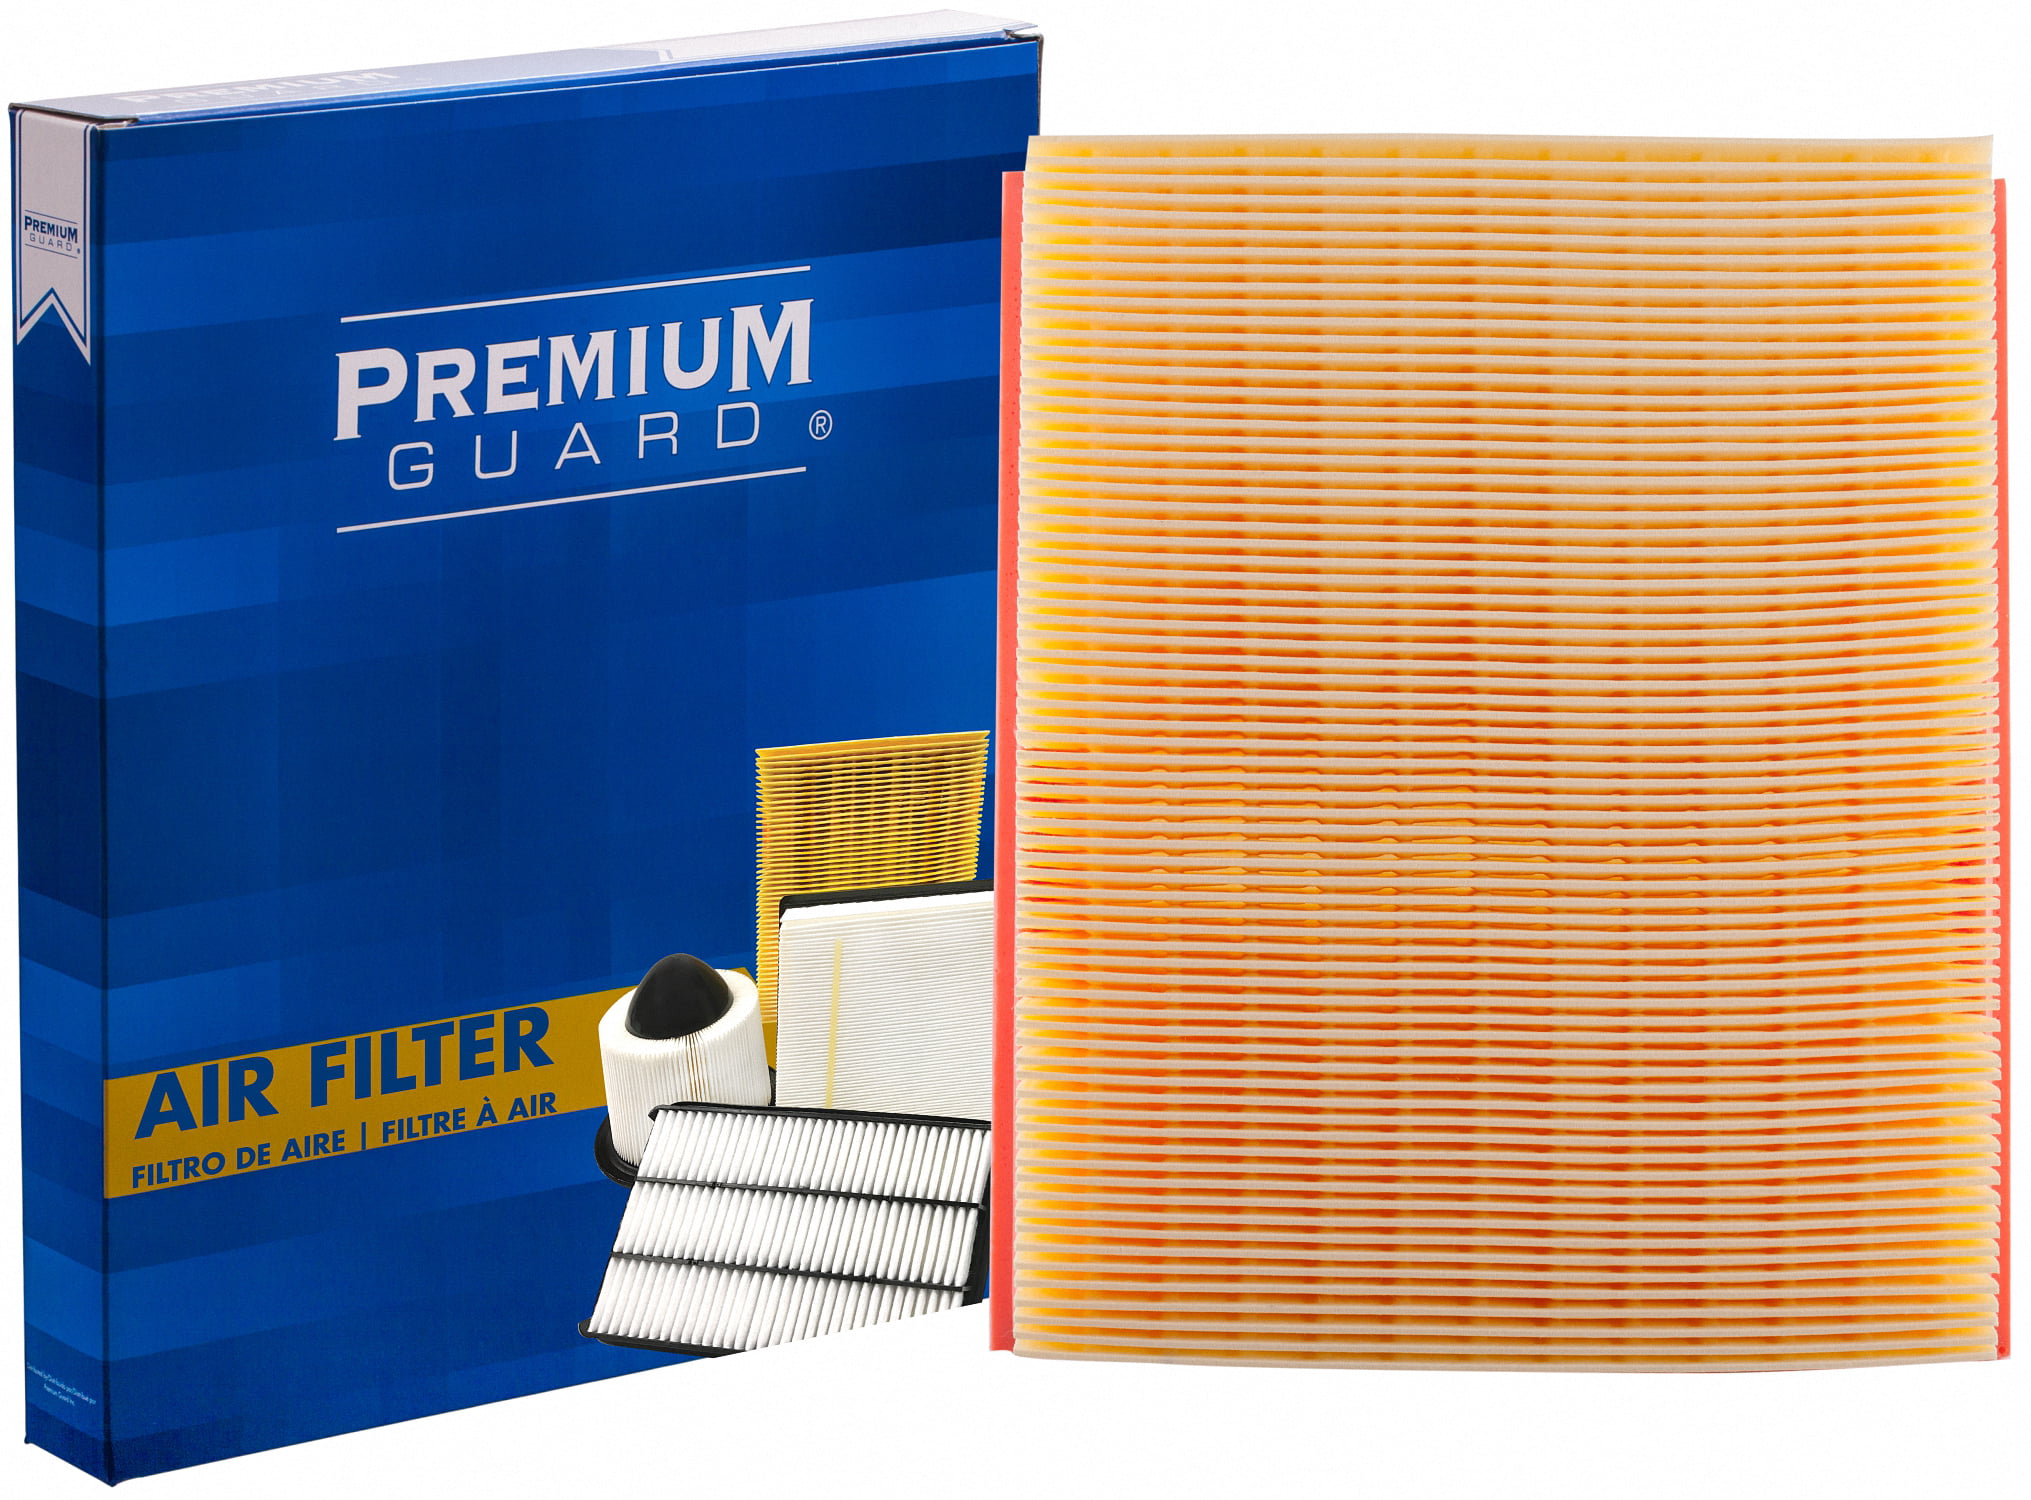 Freelander 2005-2002 Fits Land Rover Discovery 2004-1999 Premium Guard Air Filter PA5381 Range Rover 2002-1995 